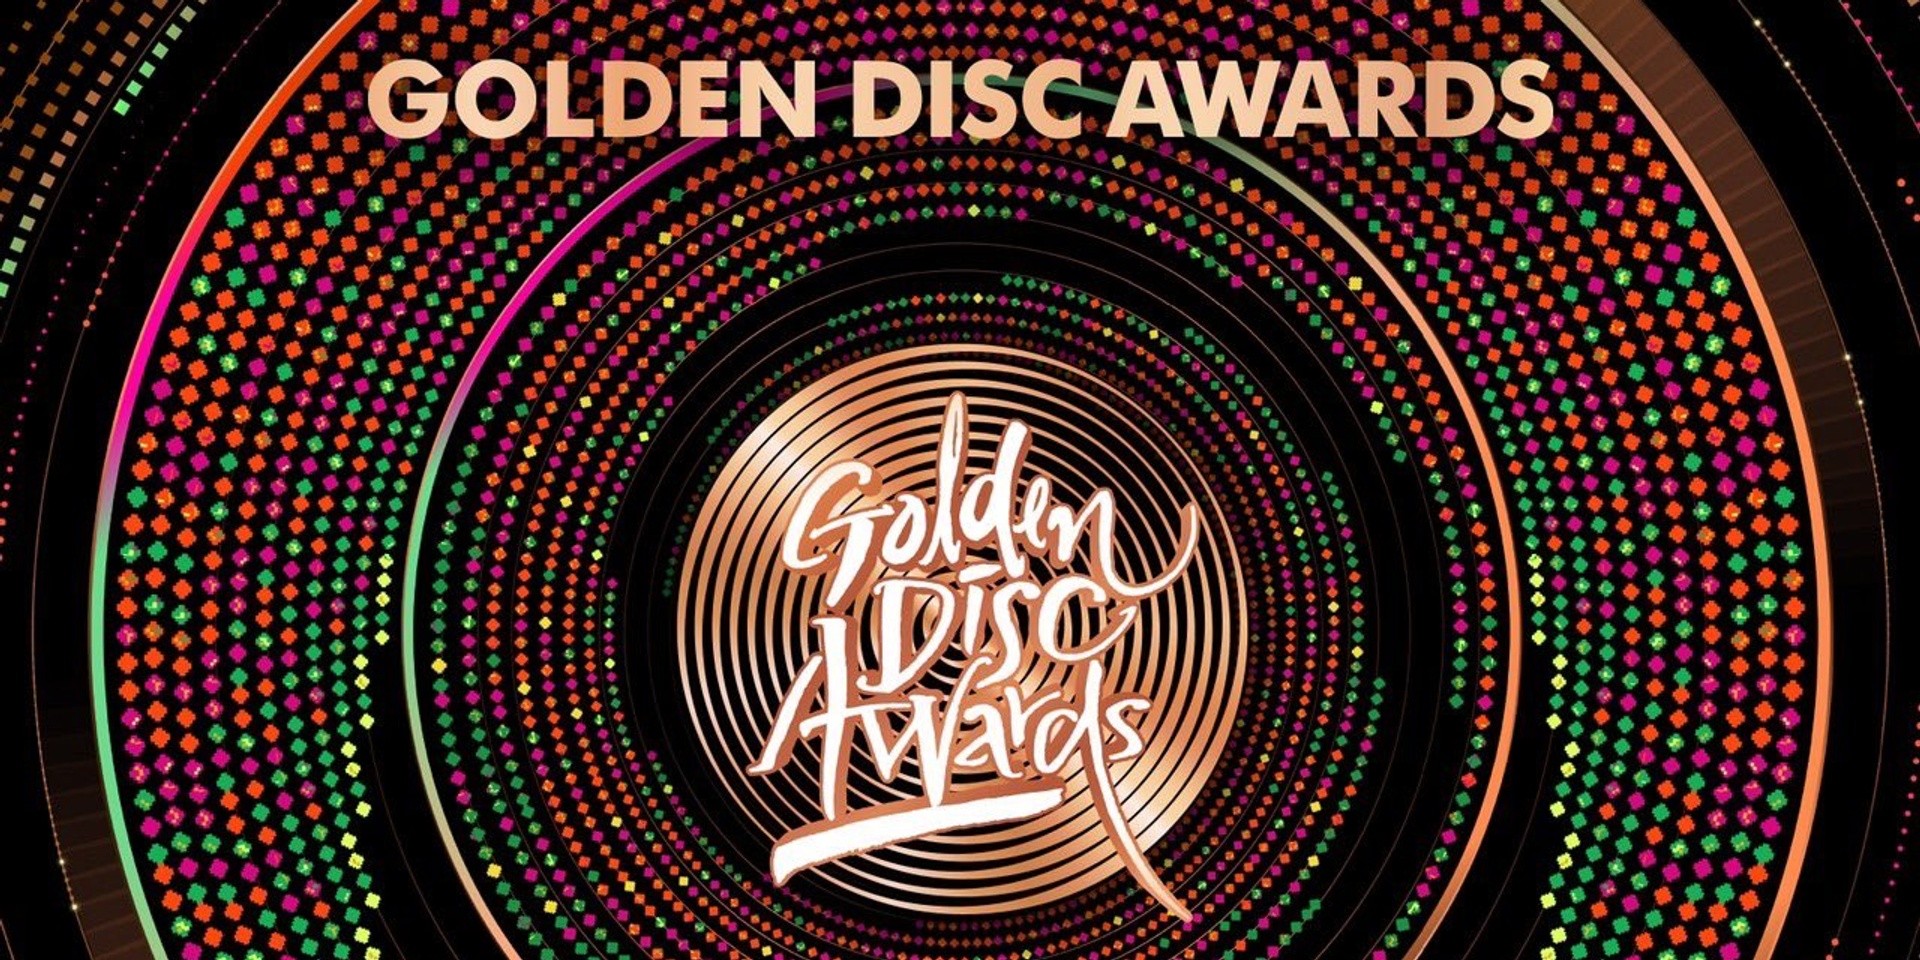 The 37th Golden Disc Awards to take place in Bangkok